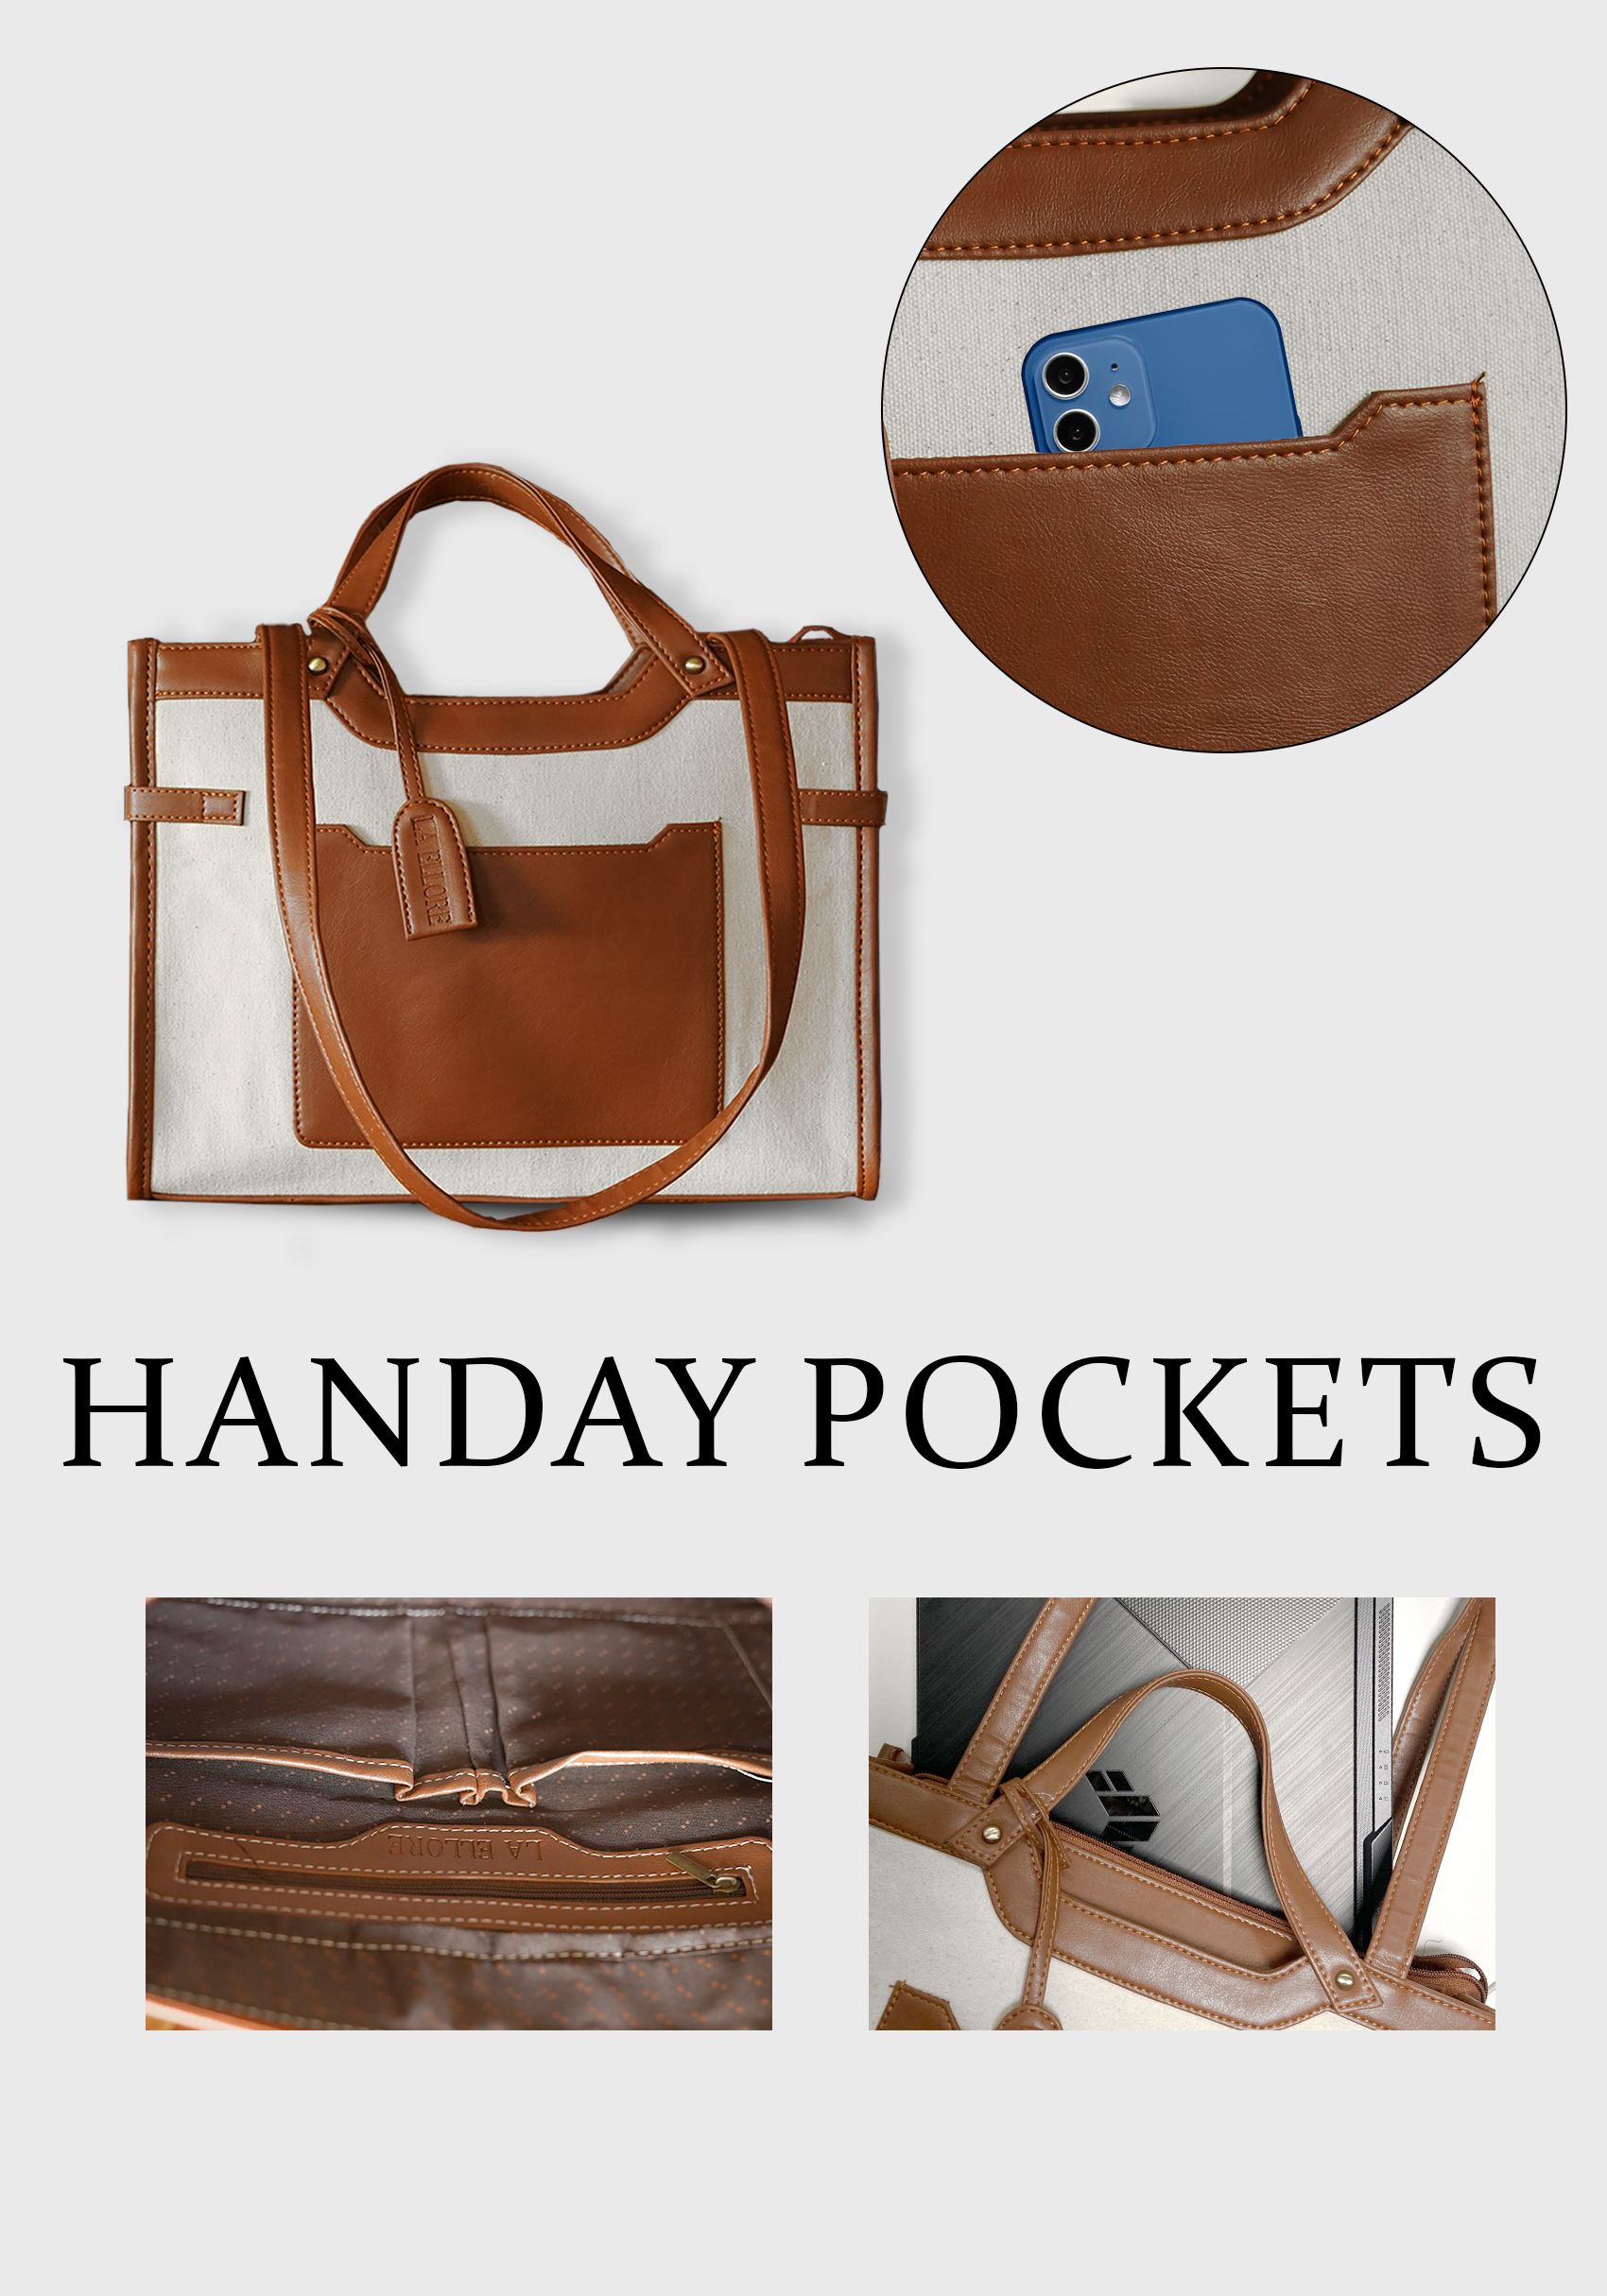 Multifunctional Handbags are the Latest Accessory Trend